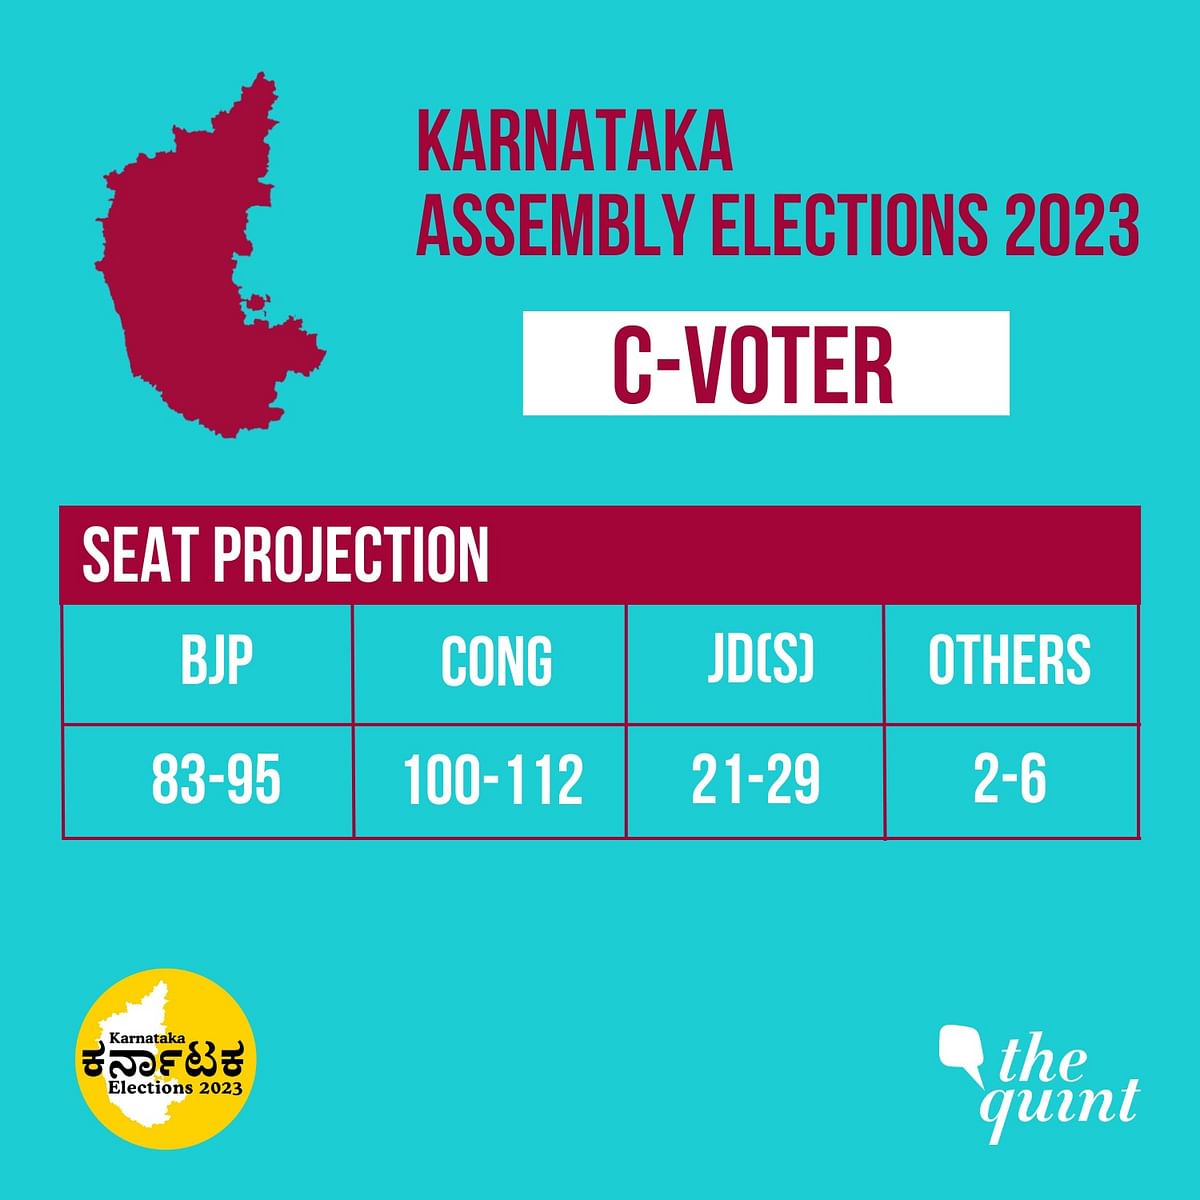 The winning party or coalition would need at least 113 seats to form a majority government in the state.